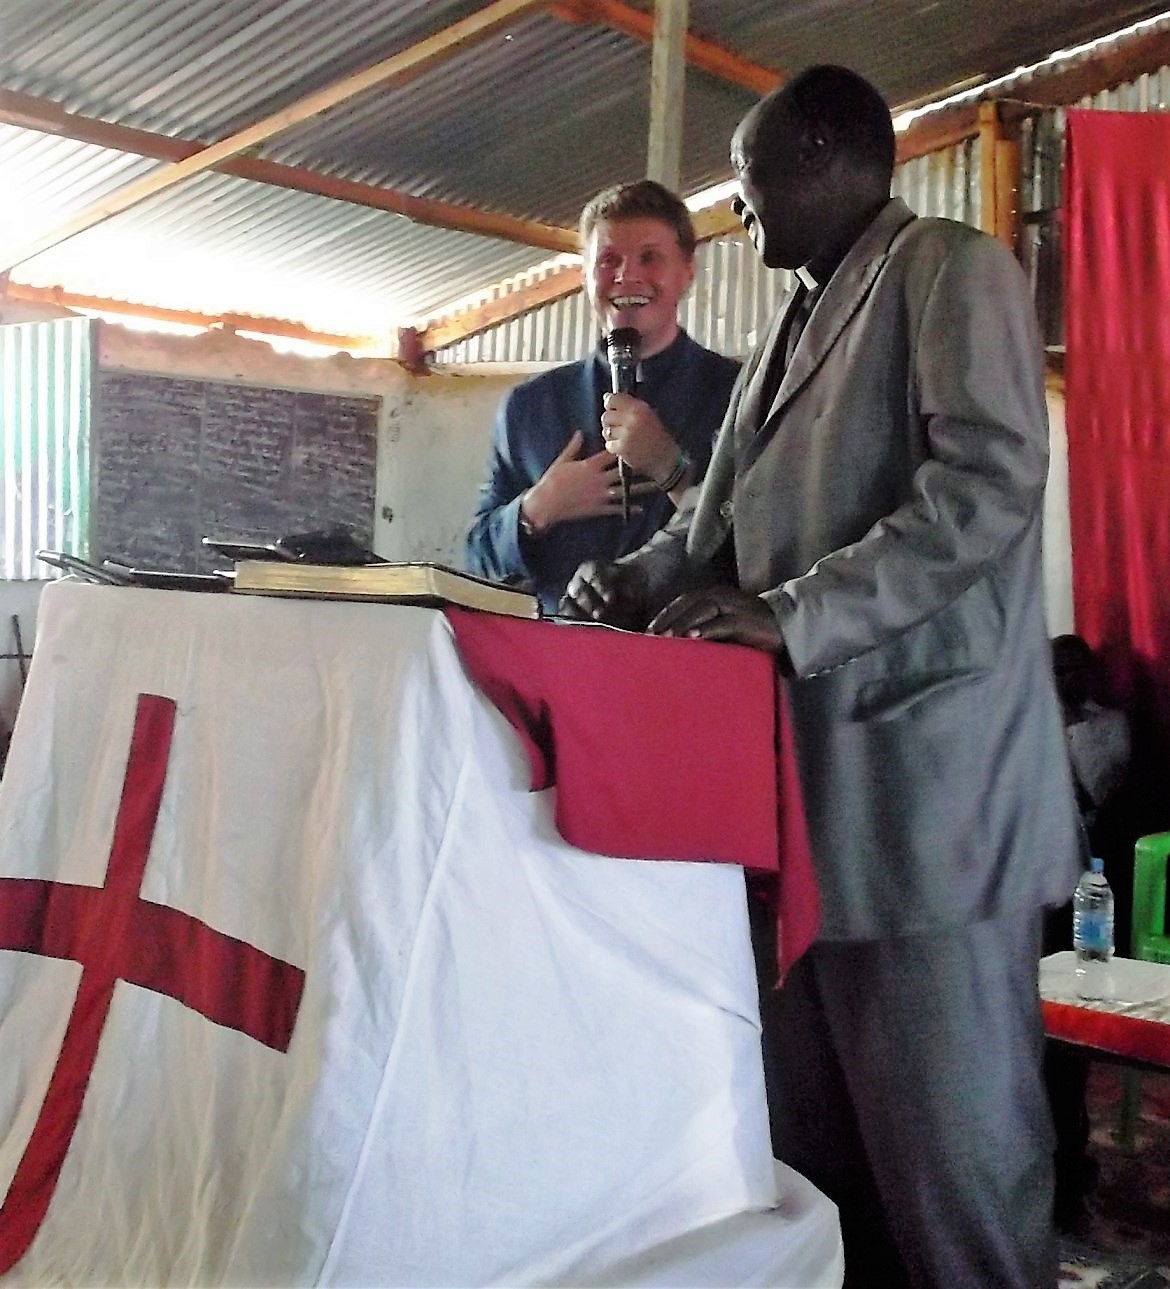 Bob preaches at a large church in the refugee camp, while Pastor Peter translates into Nuer.